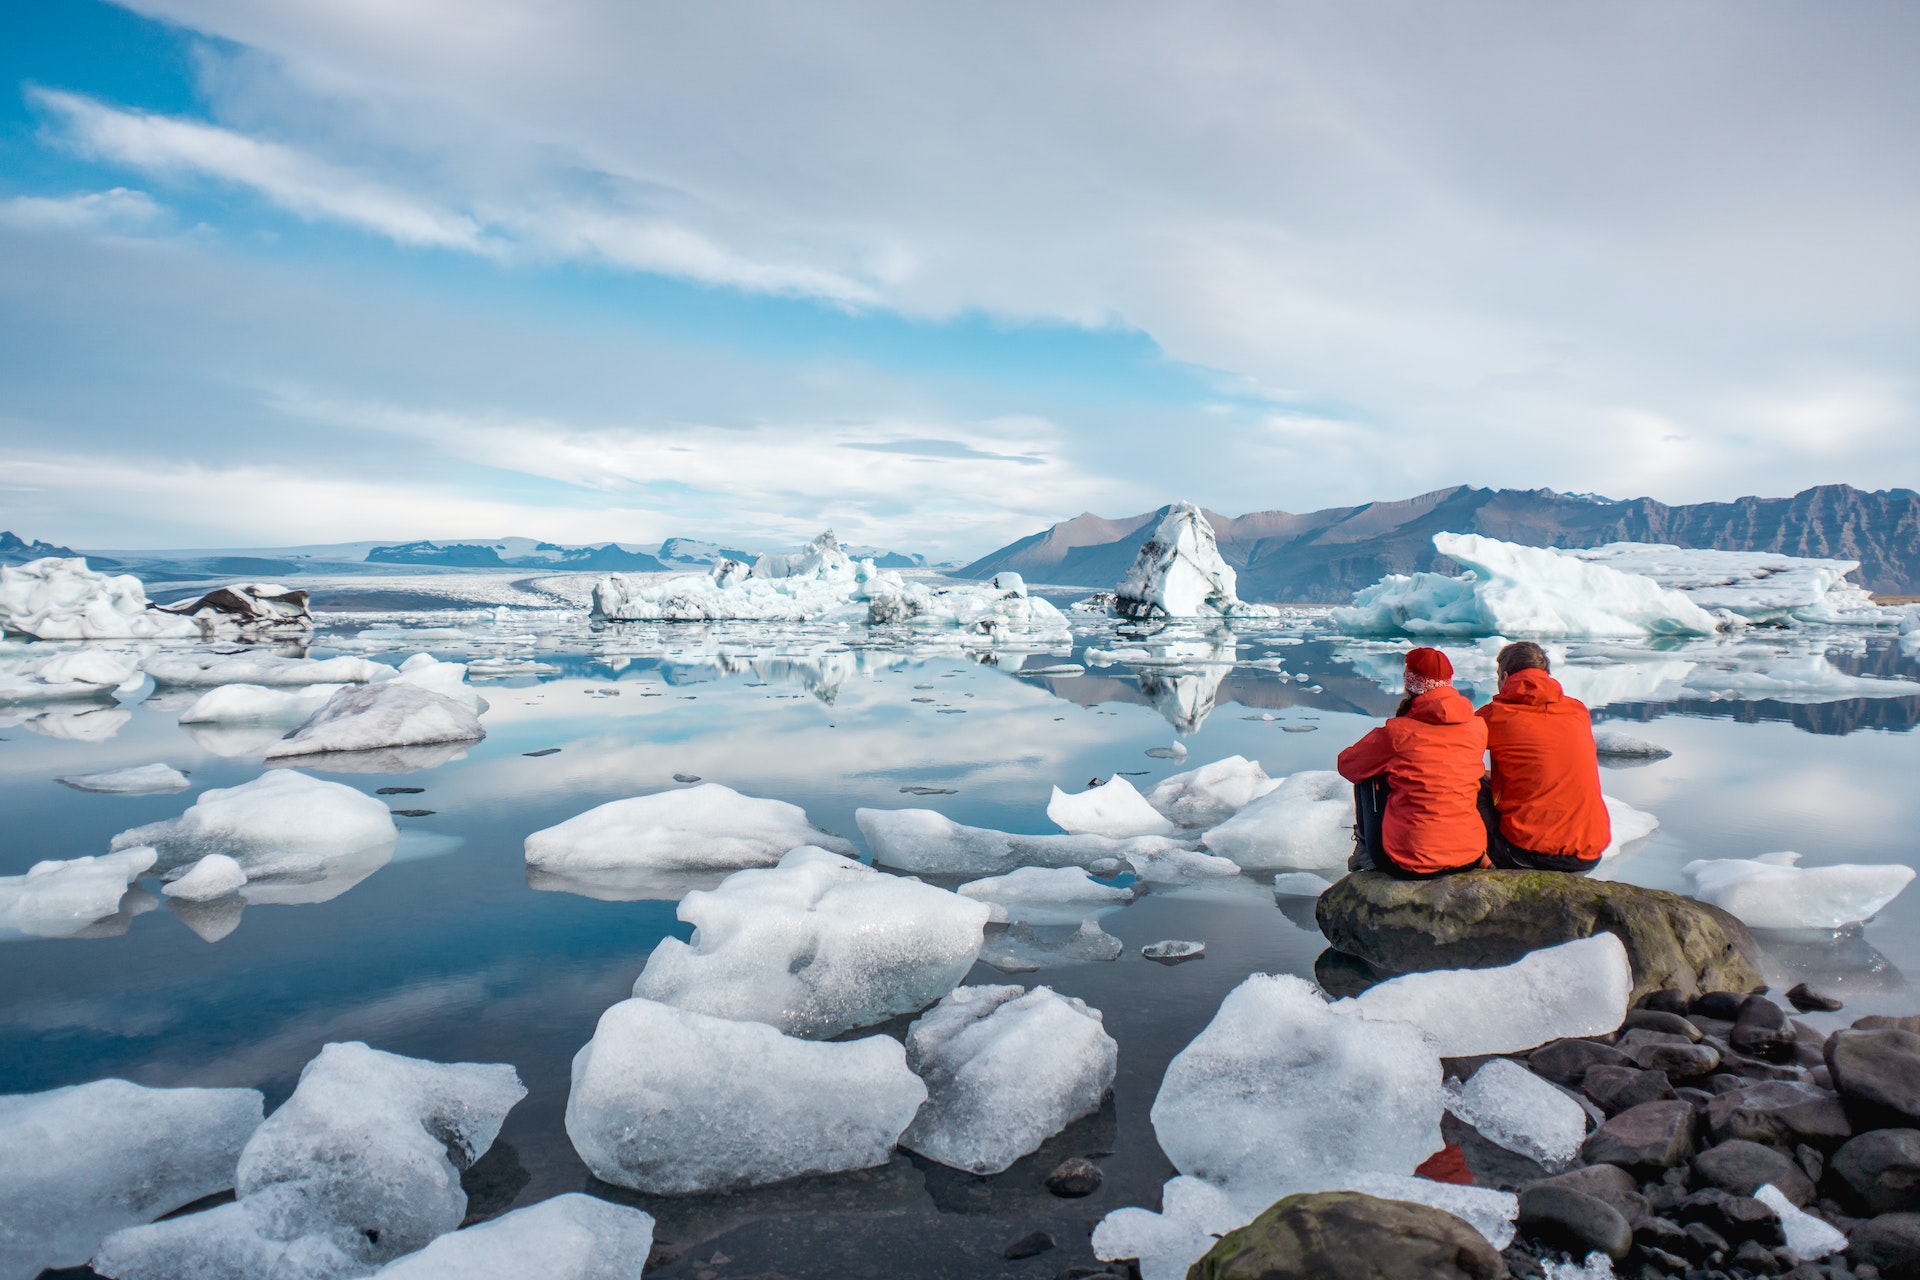 A couple sit on the edge of a lagoon filled with icebergs 